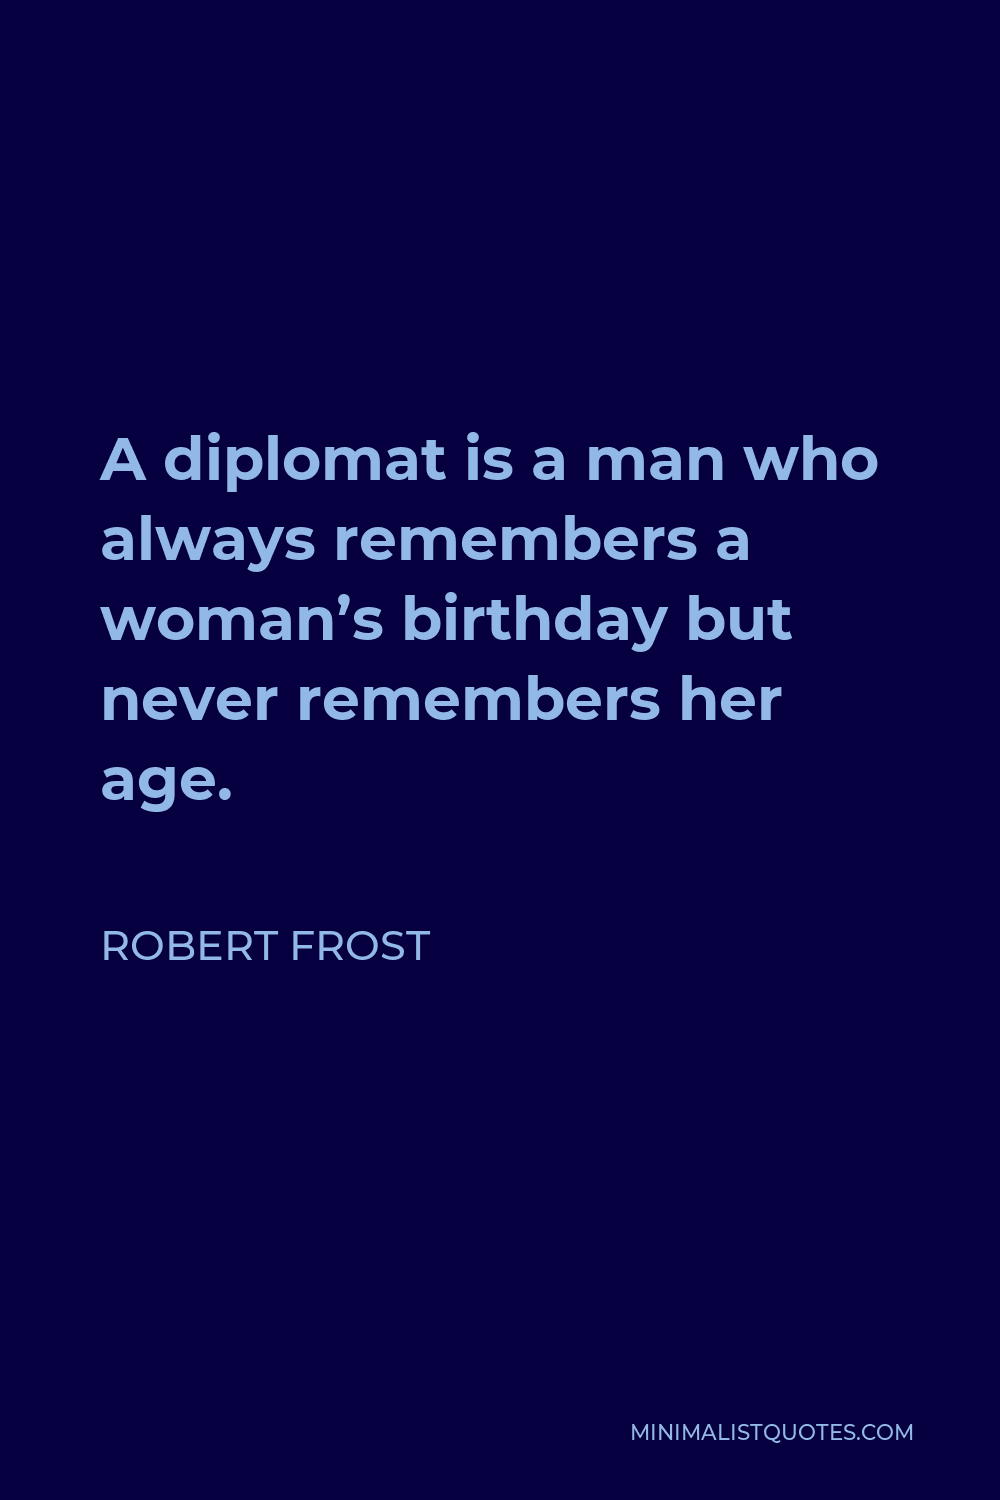 Robert Frost Quote - A diplomat is a man who always remembers a woman’s birthday but never remembers her age.